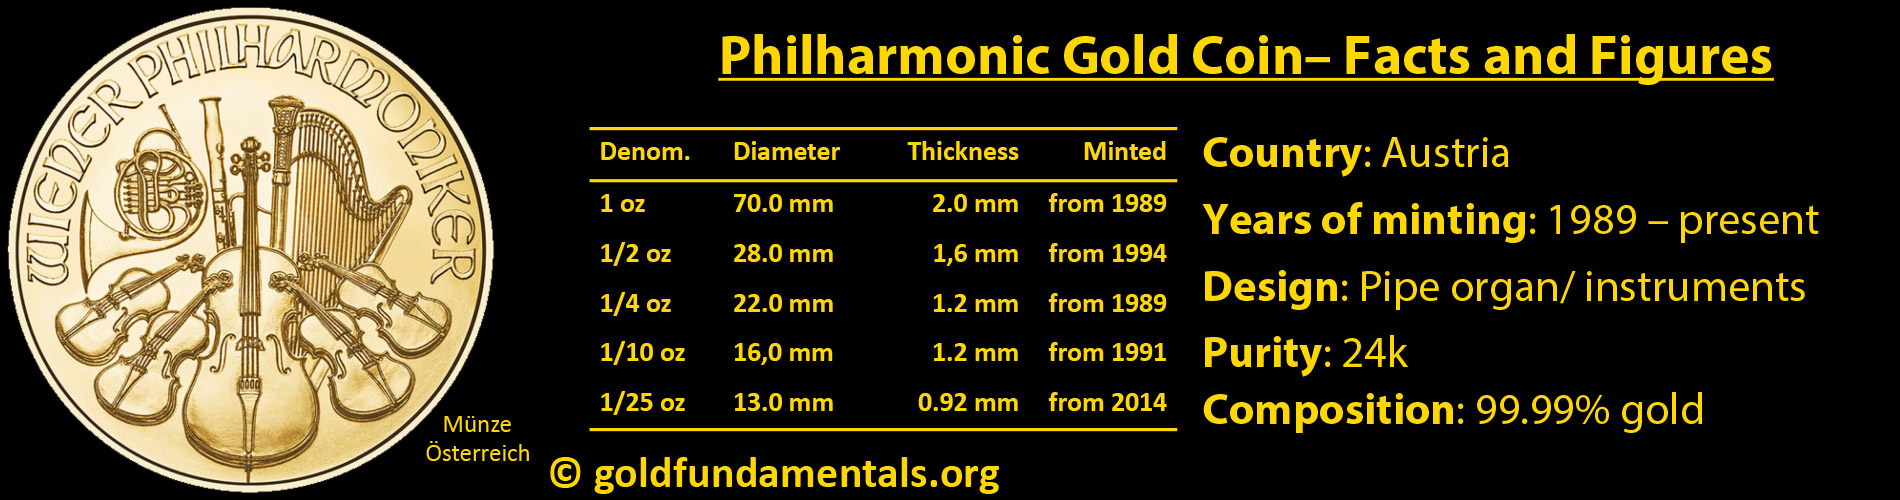 Philharmonic Gold Coin - Facts and Figures.